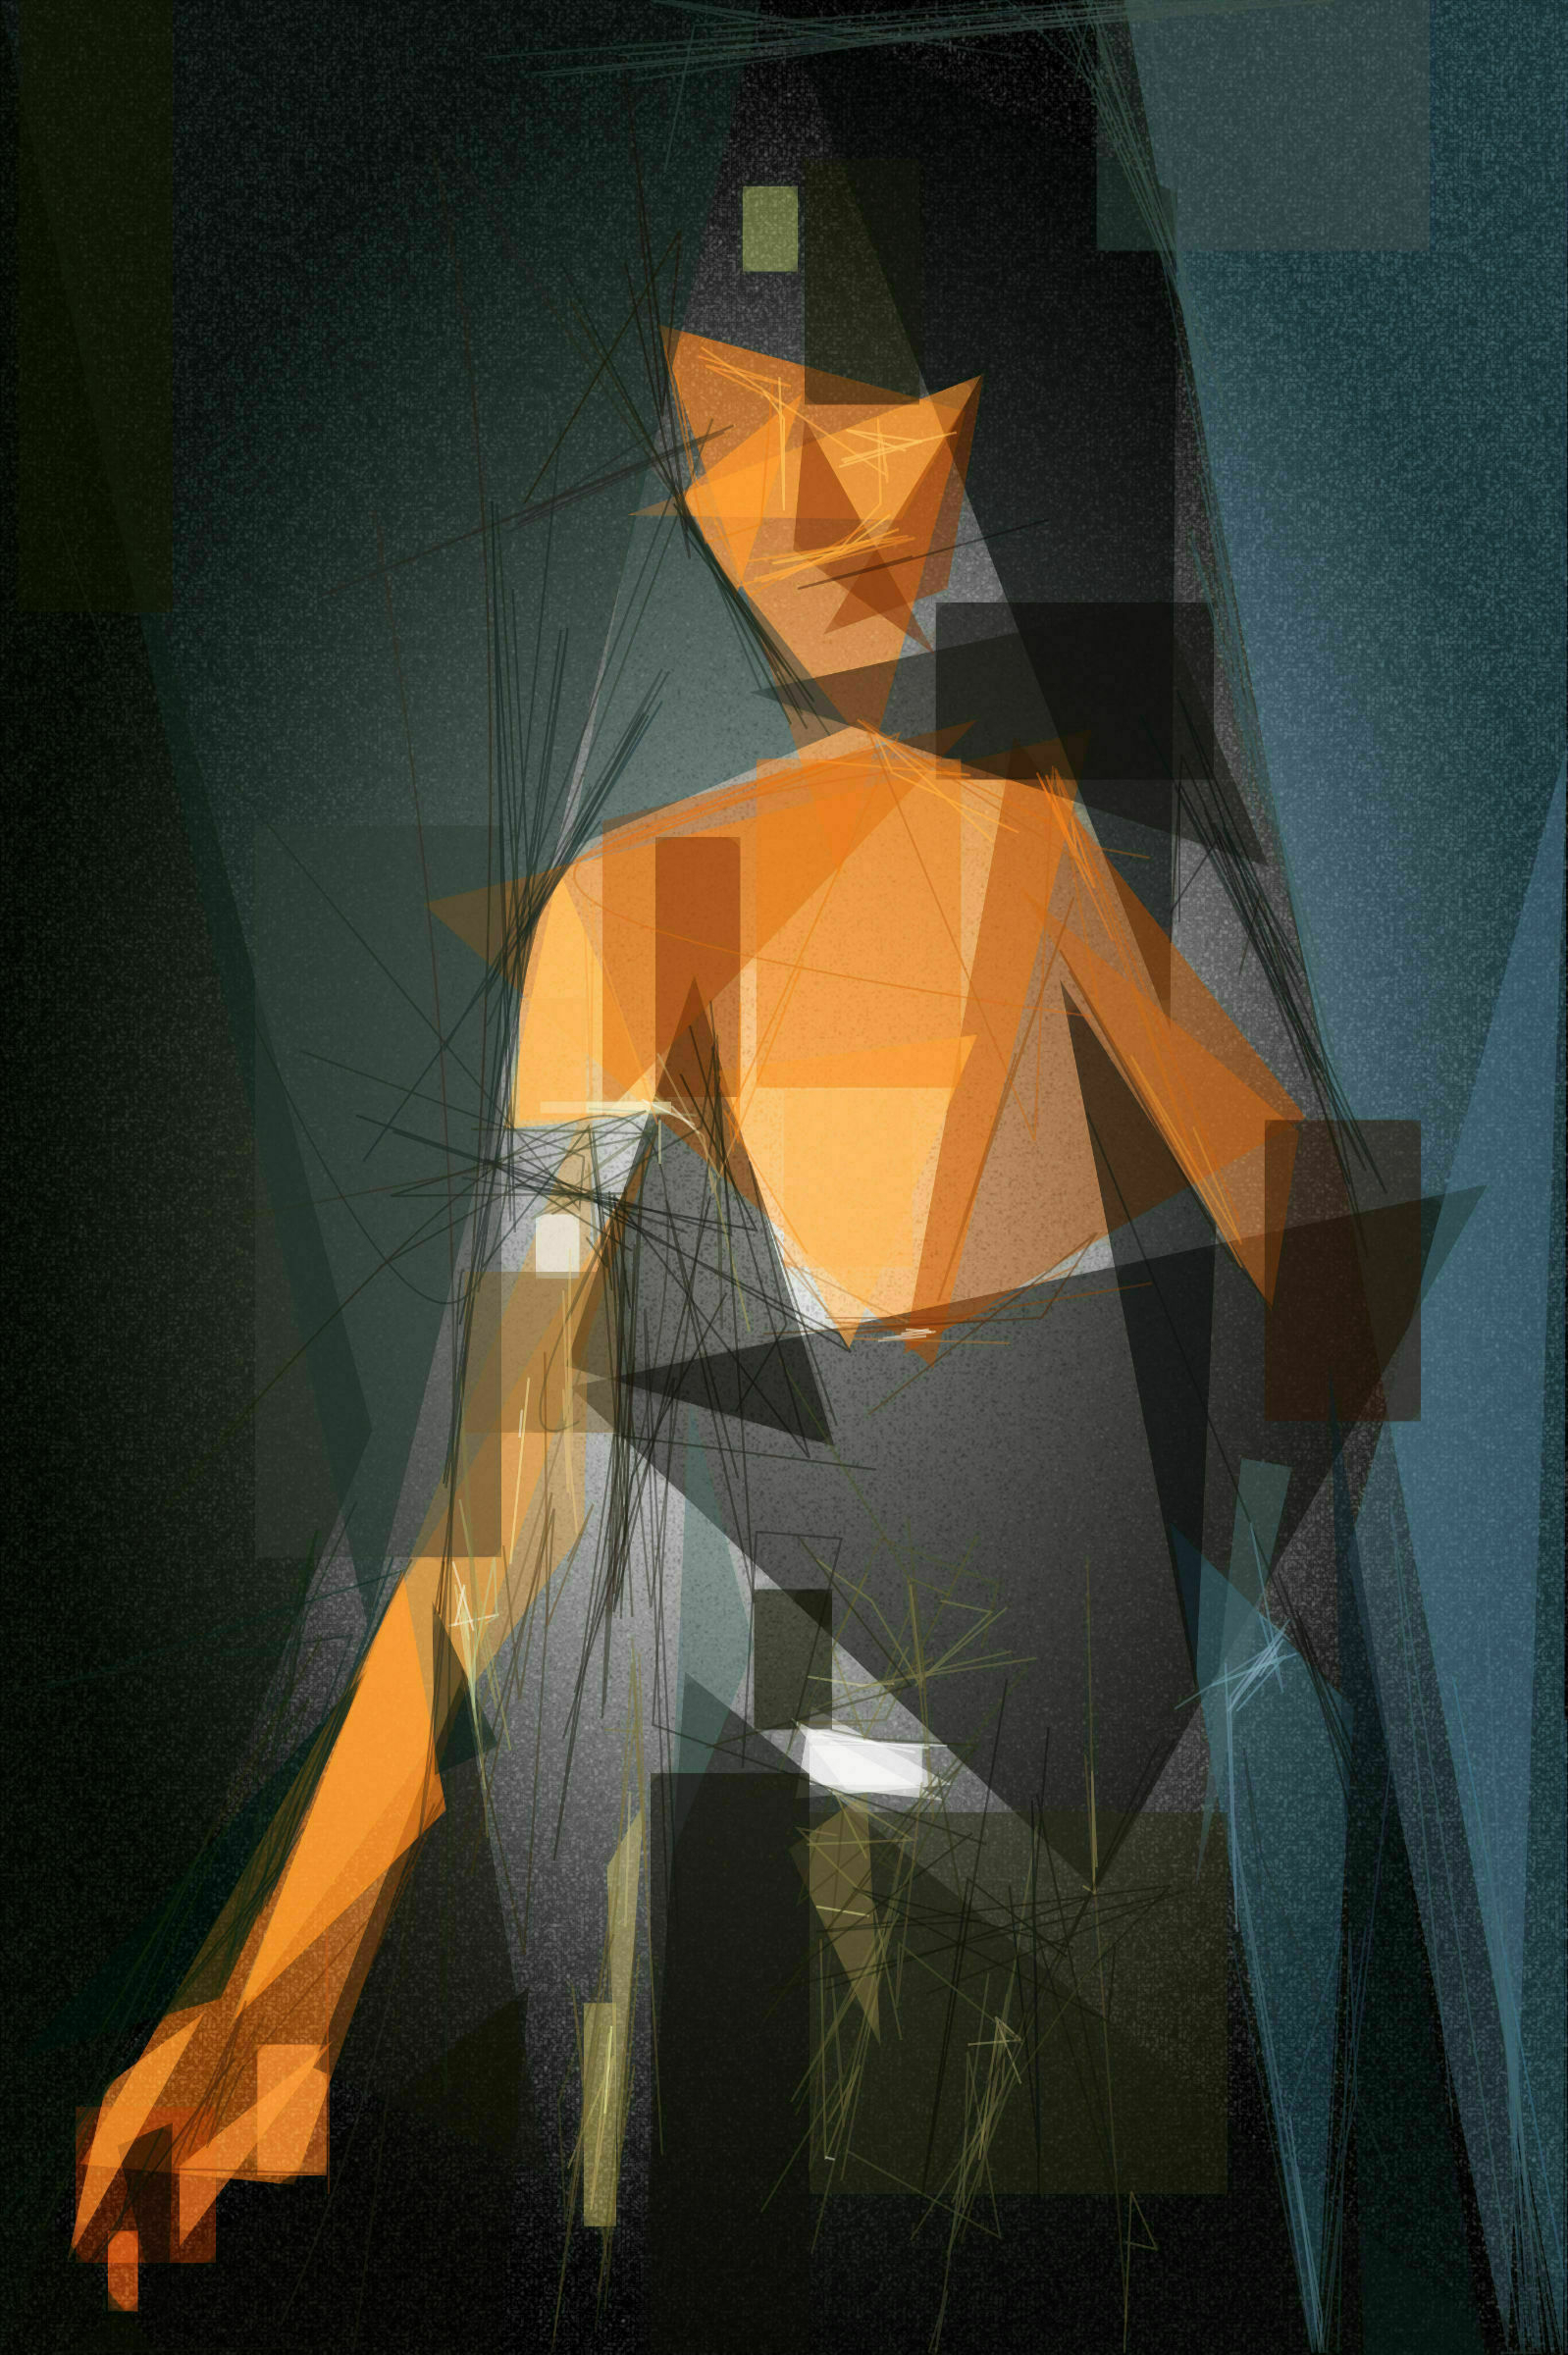 An abstract representation of a woman